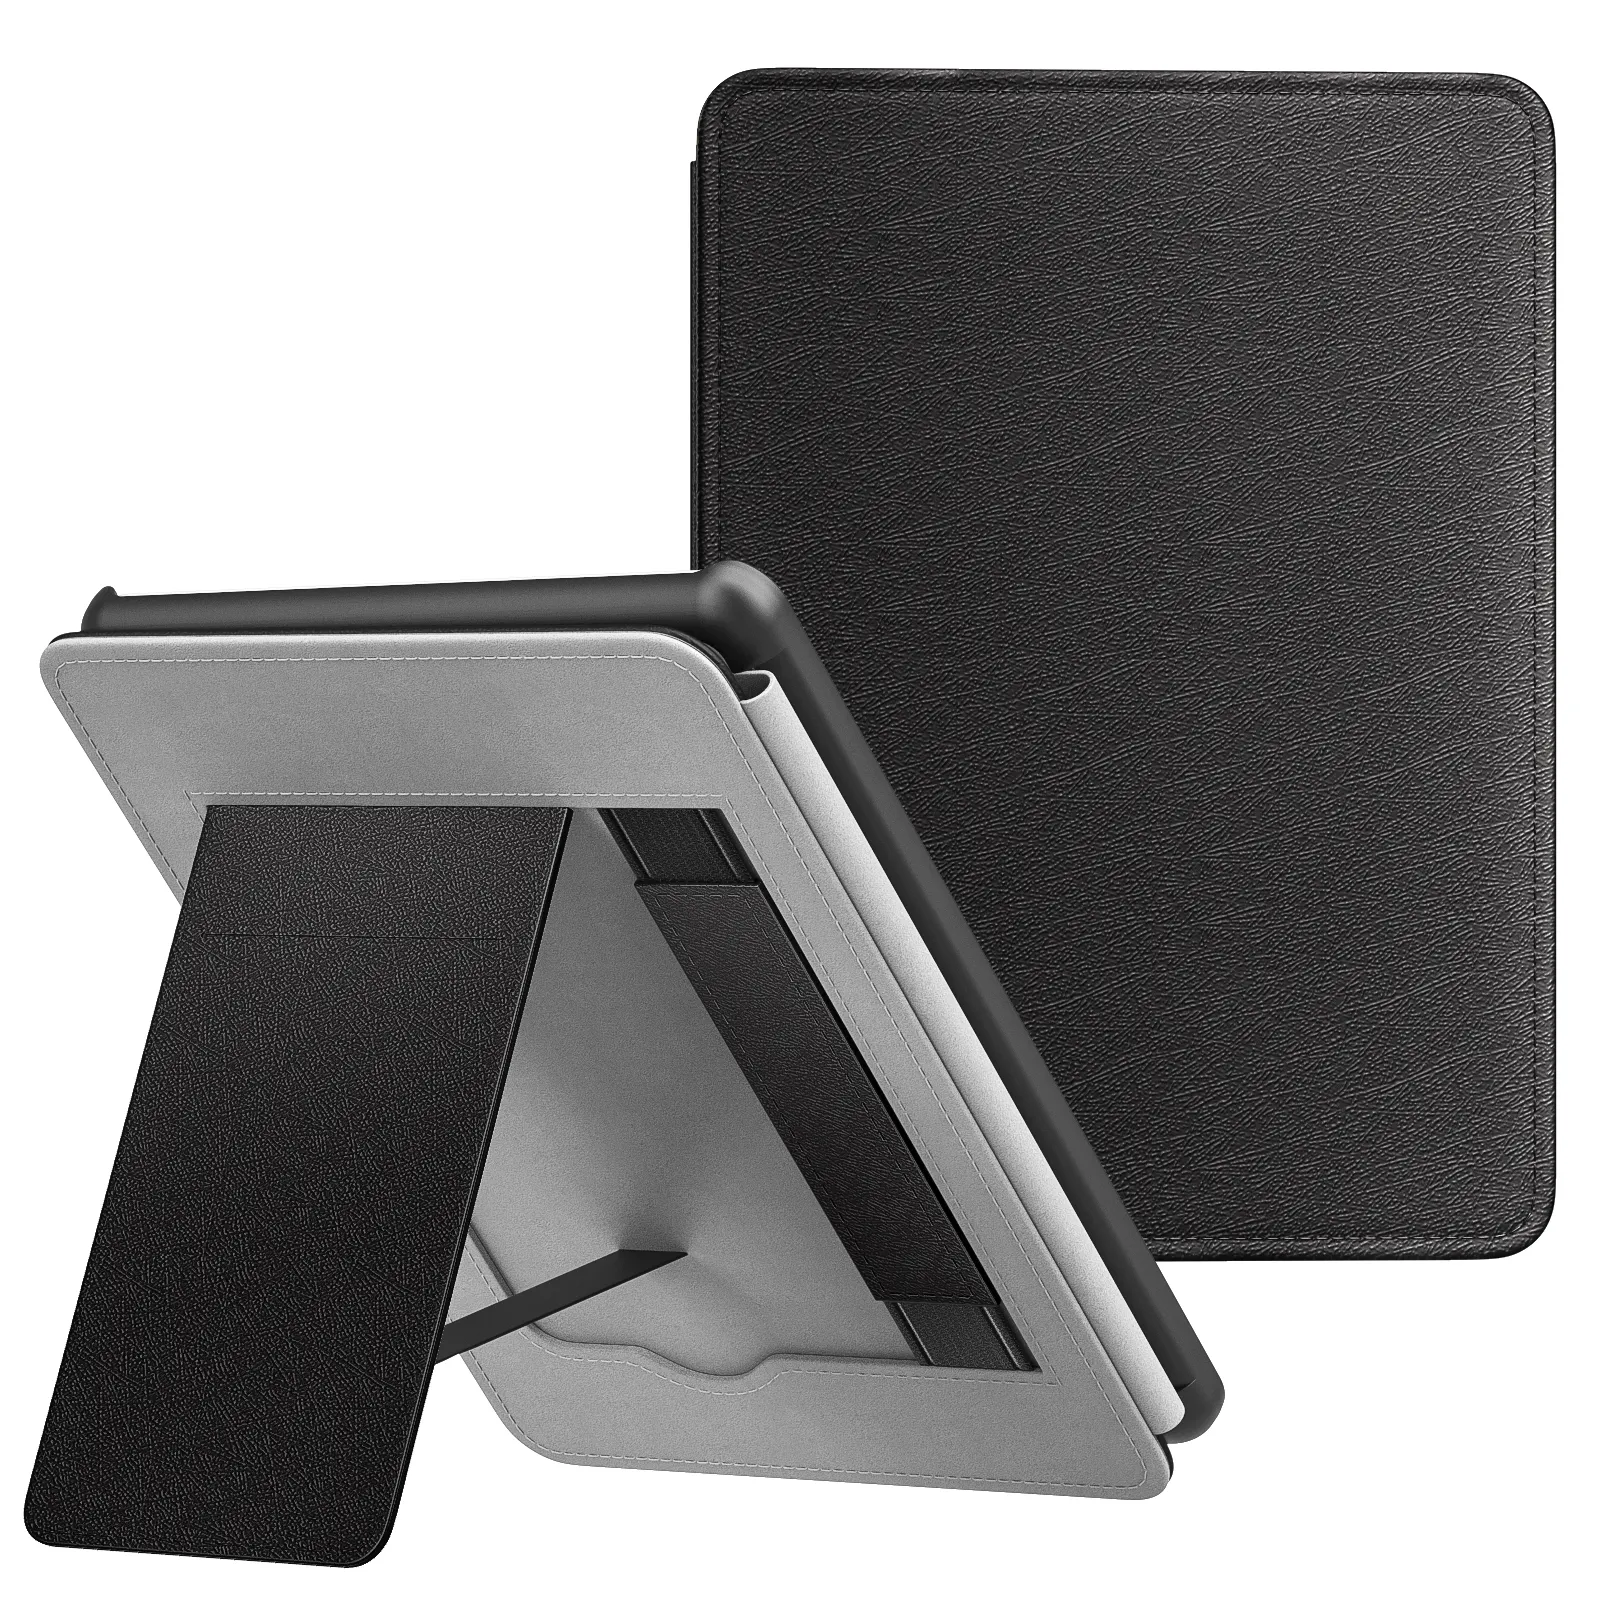 MoKo Lightweight PU Leather Cover Stand Shell with Hand Strap cover case for kindle Paperwhite 2021